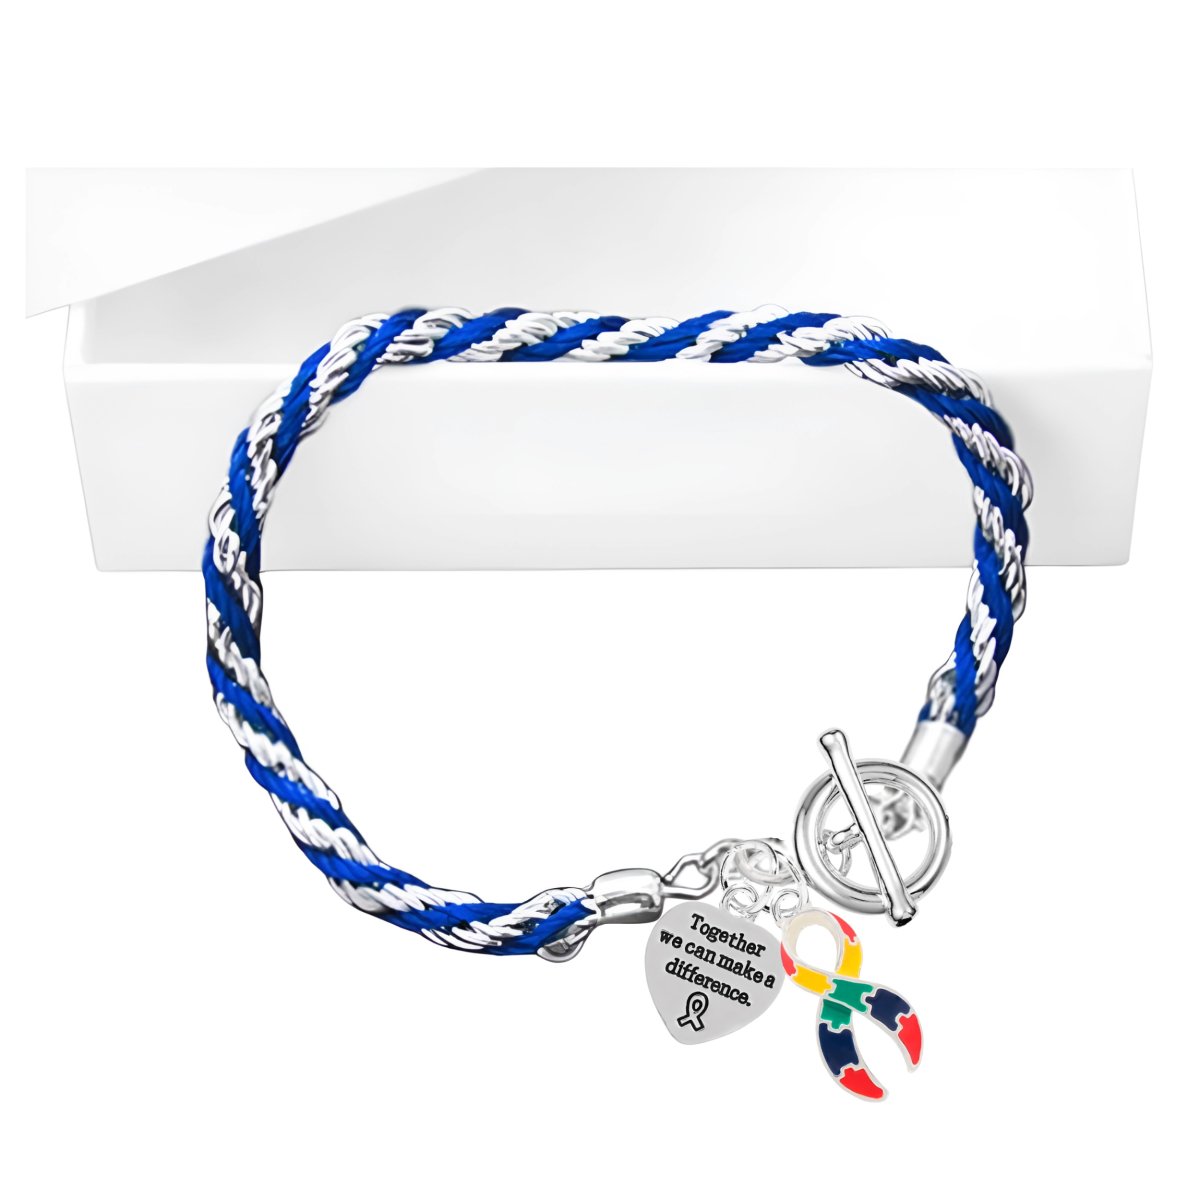 Autism Awareness Together Make A Difference Rope Bracelets - Fundraising For A Cause